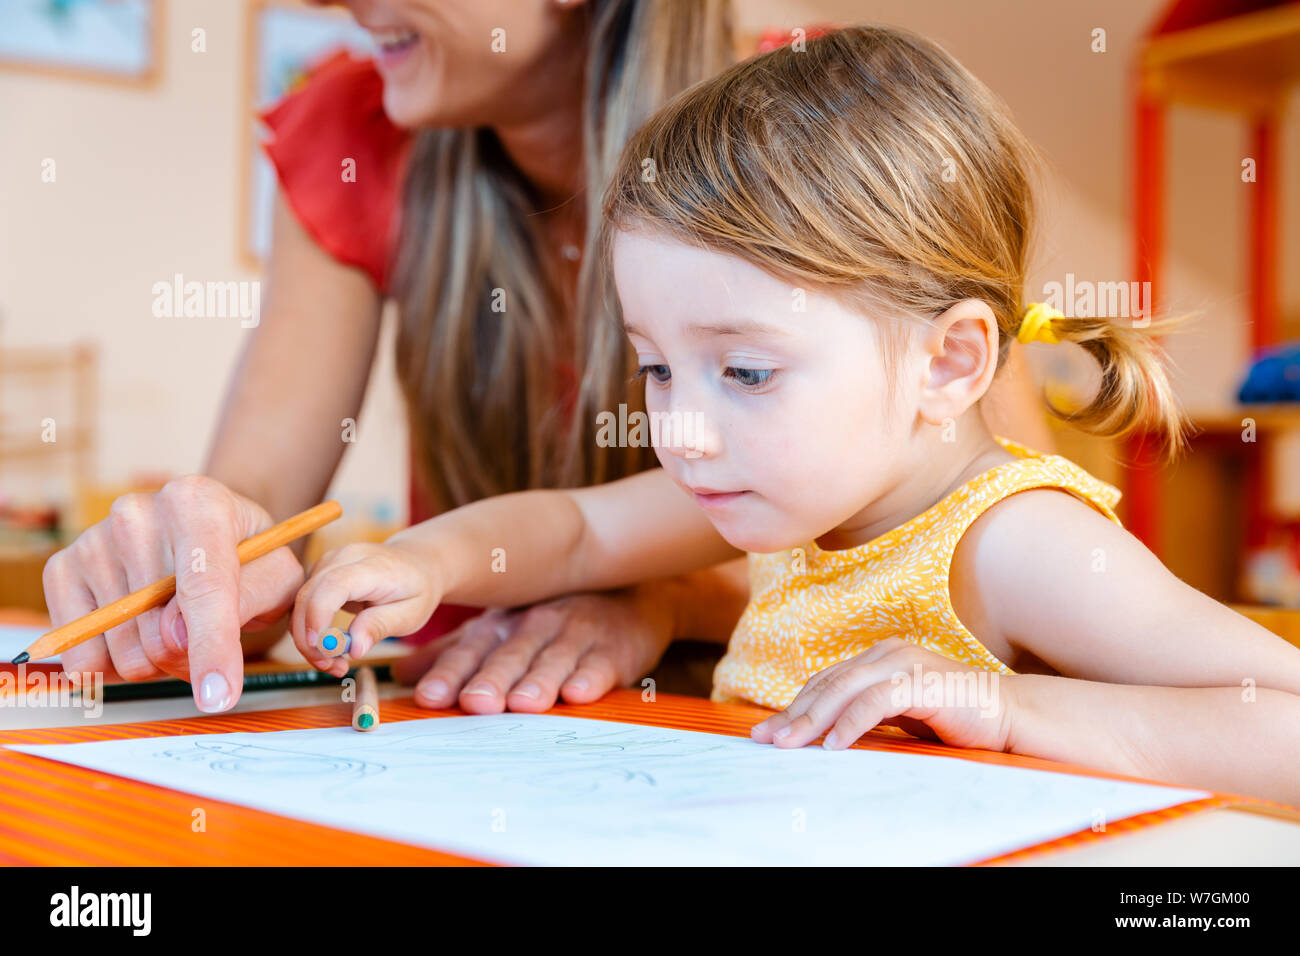 Children drawing with pencils in play school Stock Photo